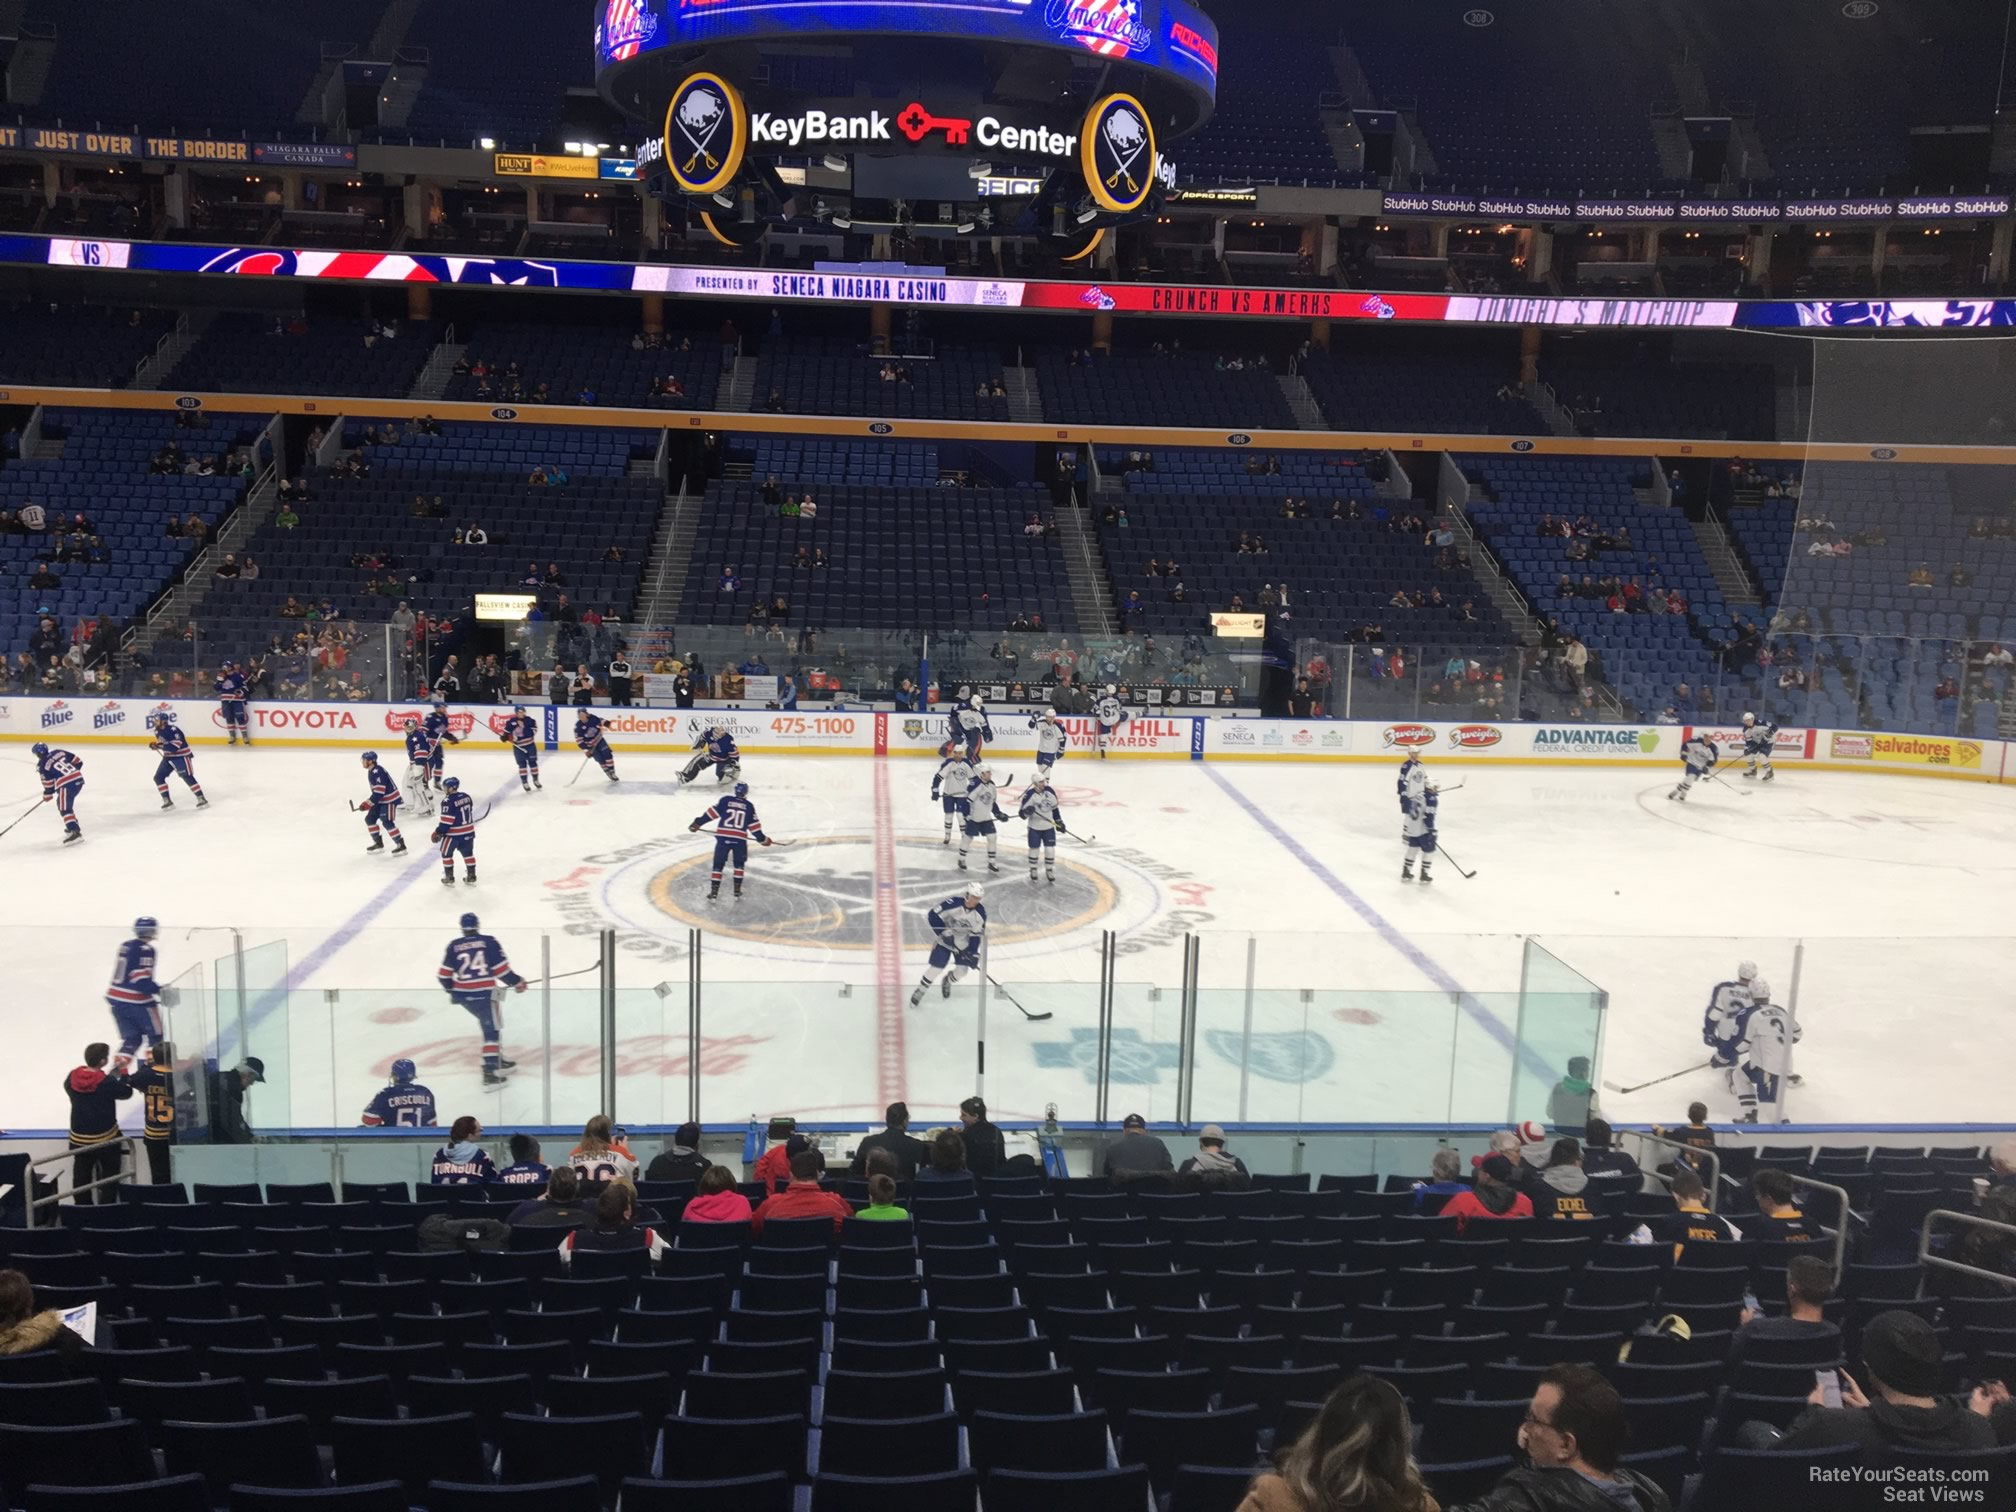 section 117, row 22 seat view  for hockey - keybank center